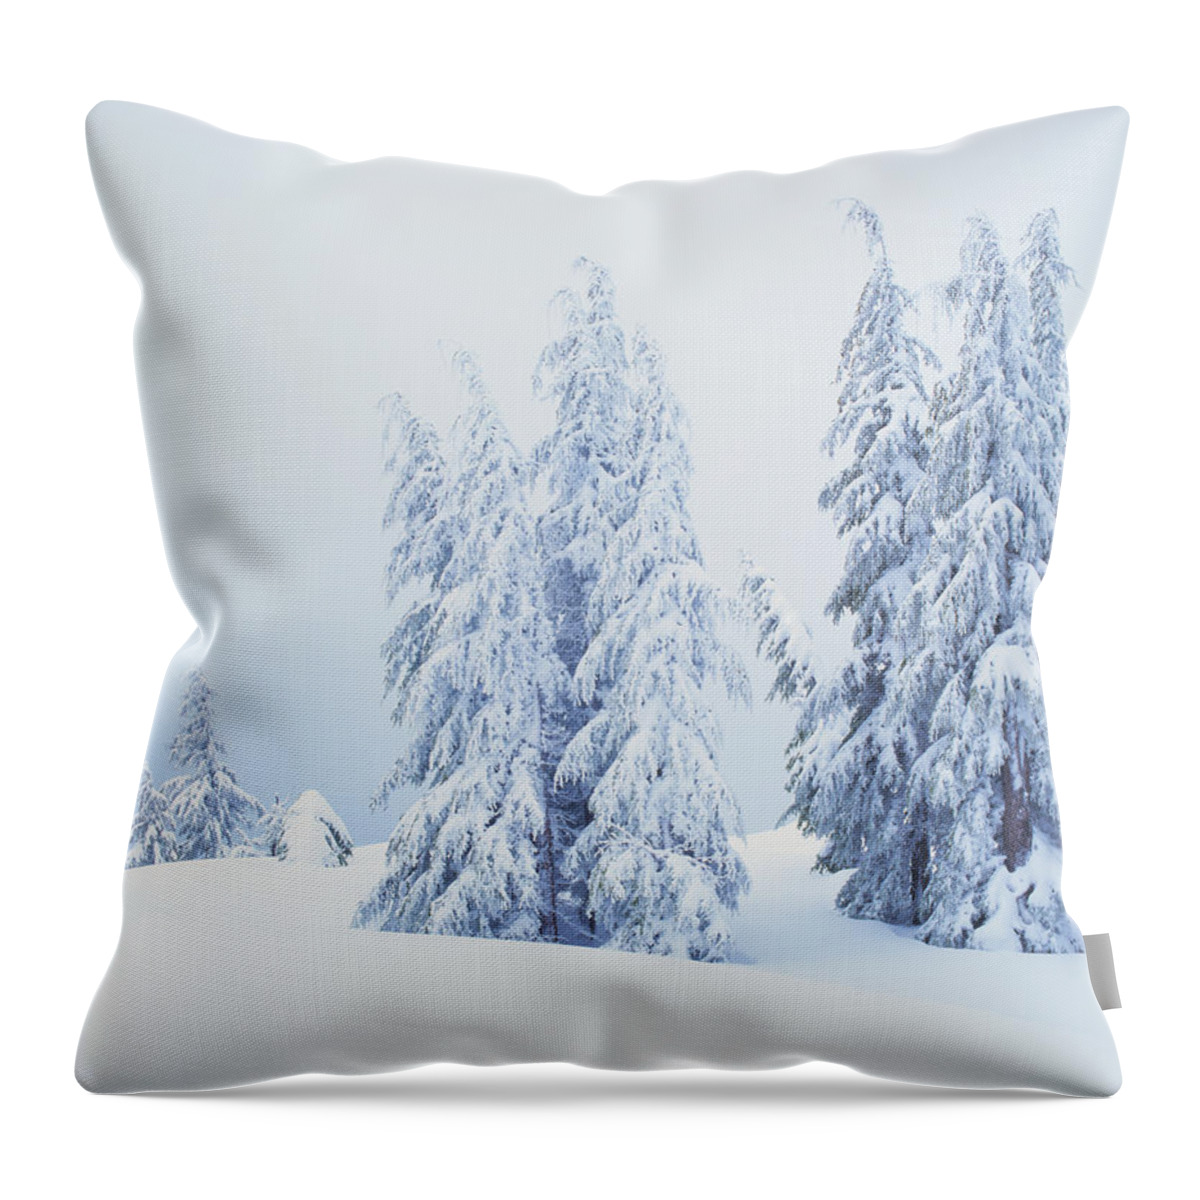 Scenics Throw Pillow featuring the photograph Winter At Crater Lake National Park  P by Ron thomas